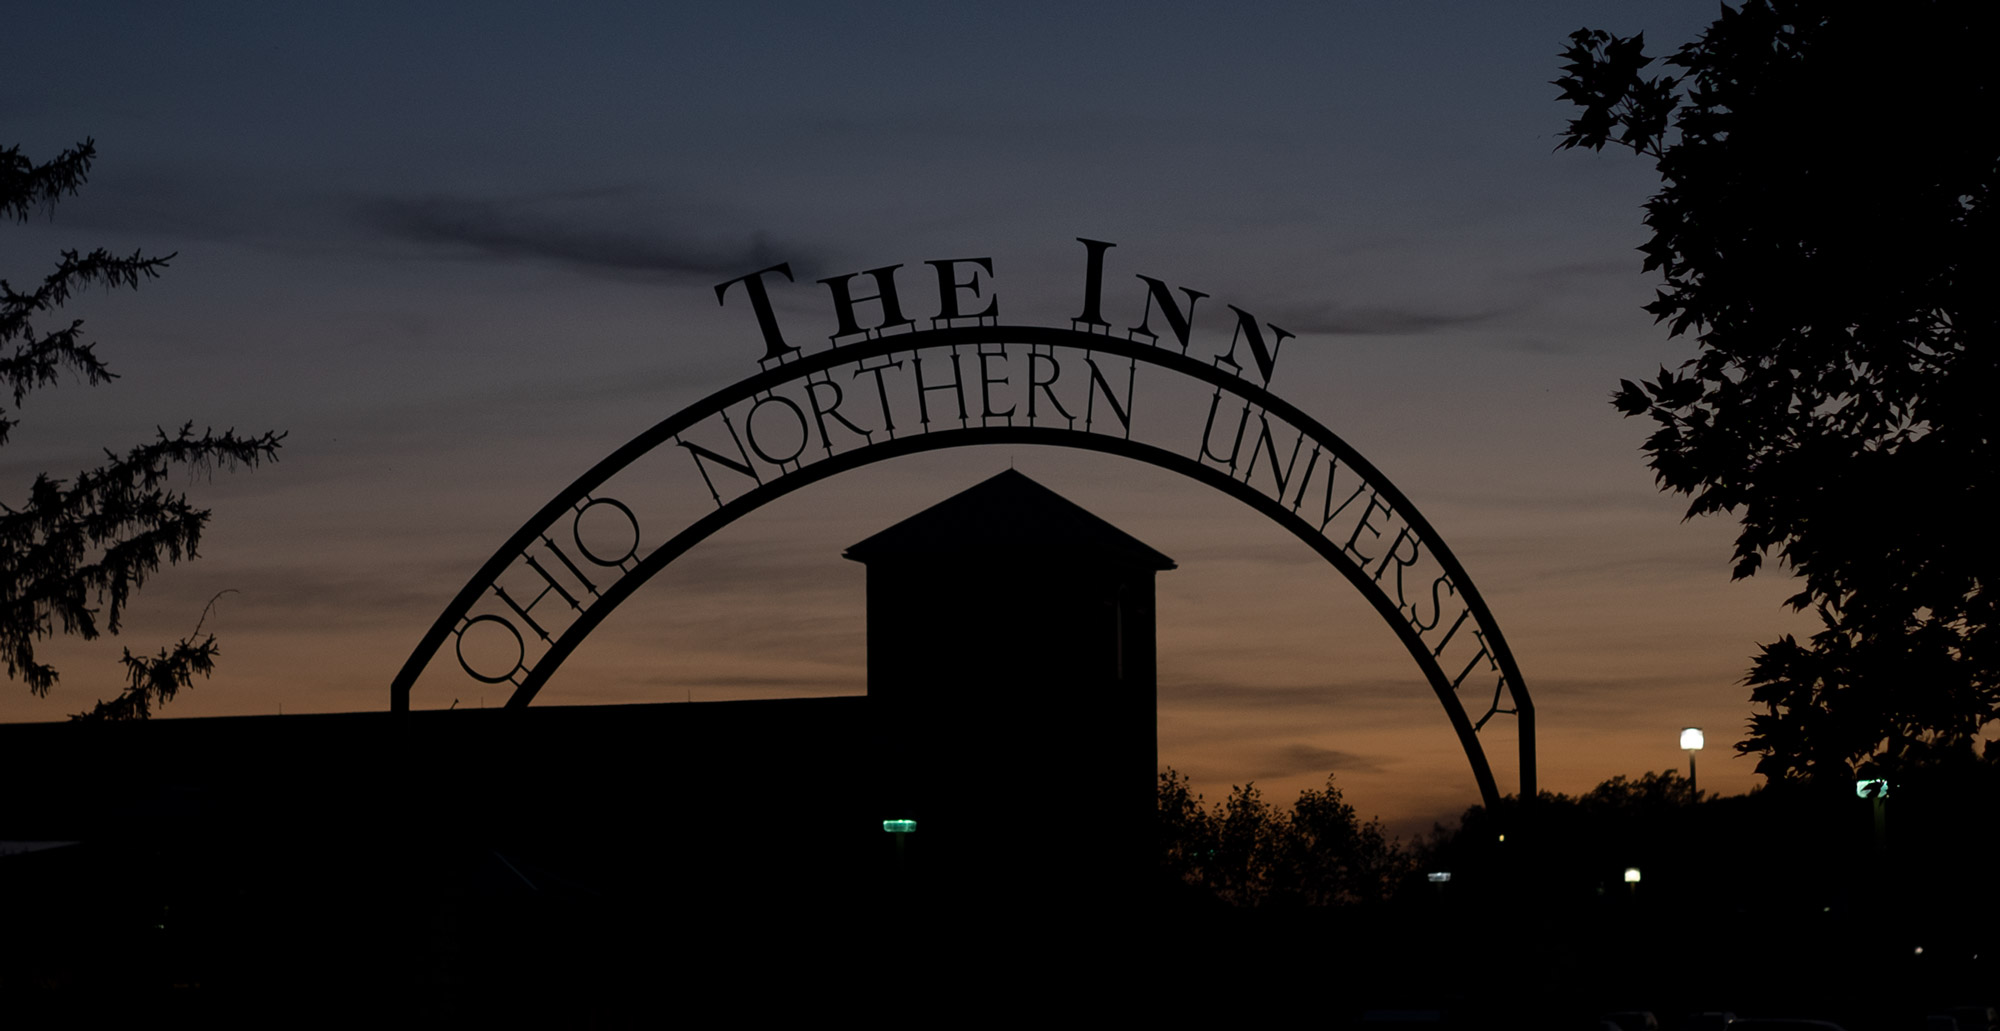 The exterior of The Inn at Ohio Northern University.